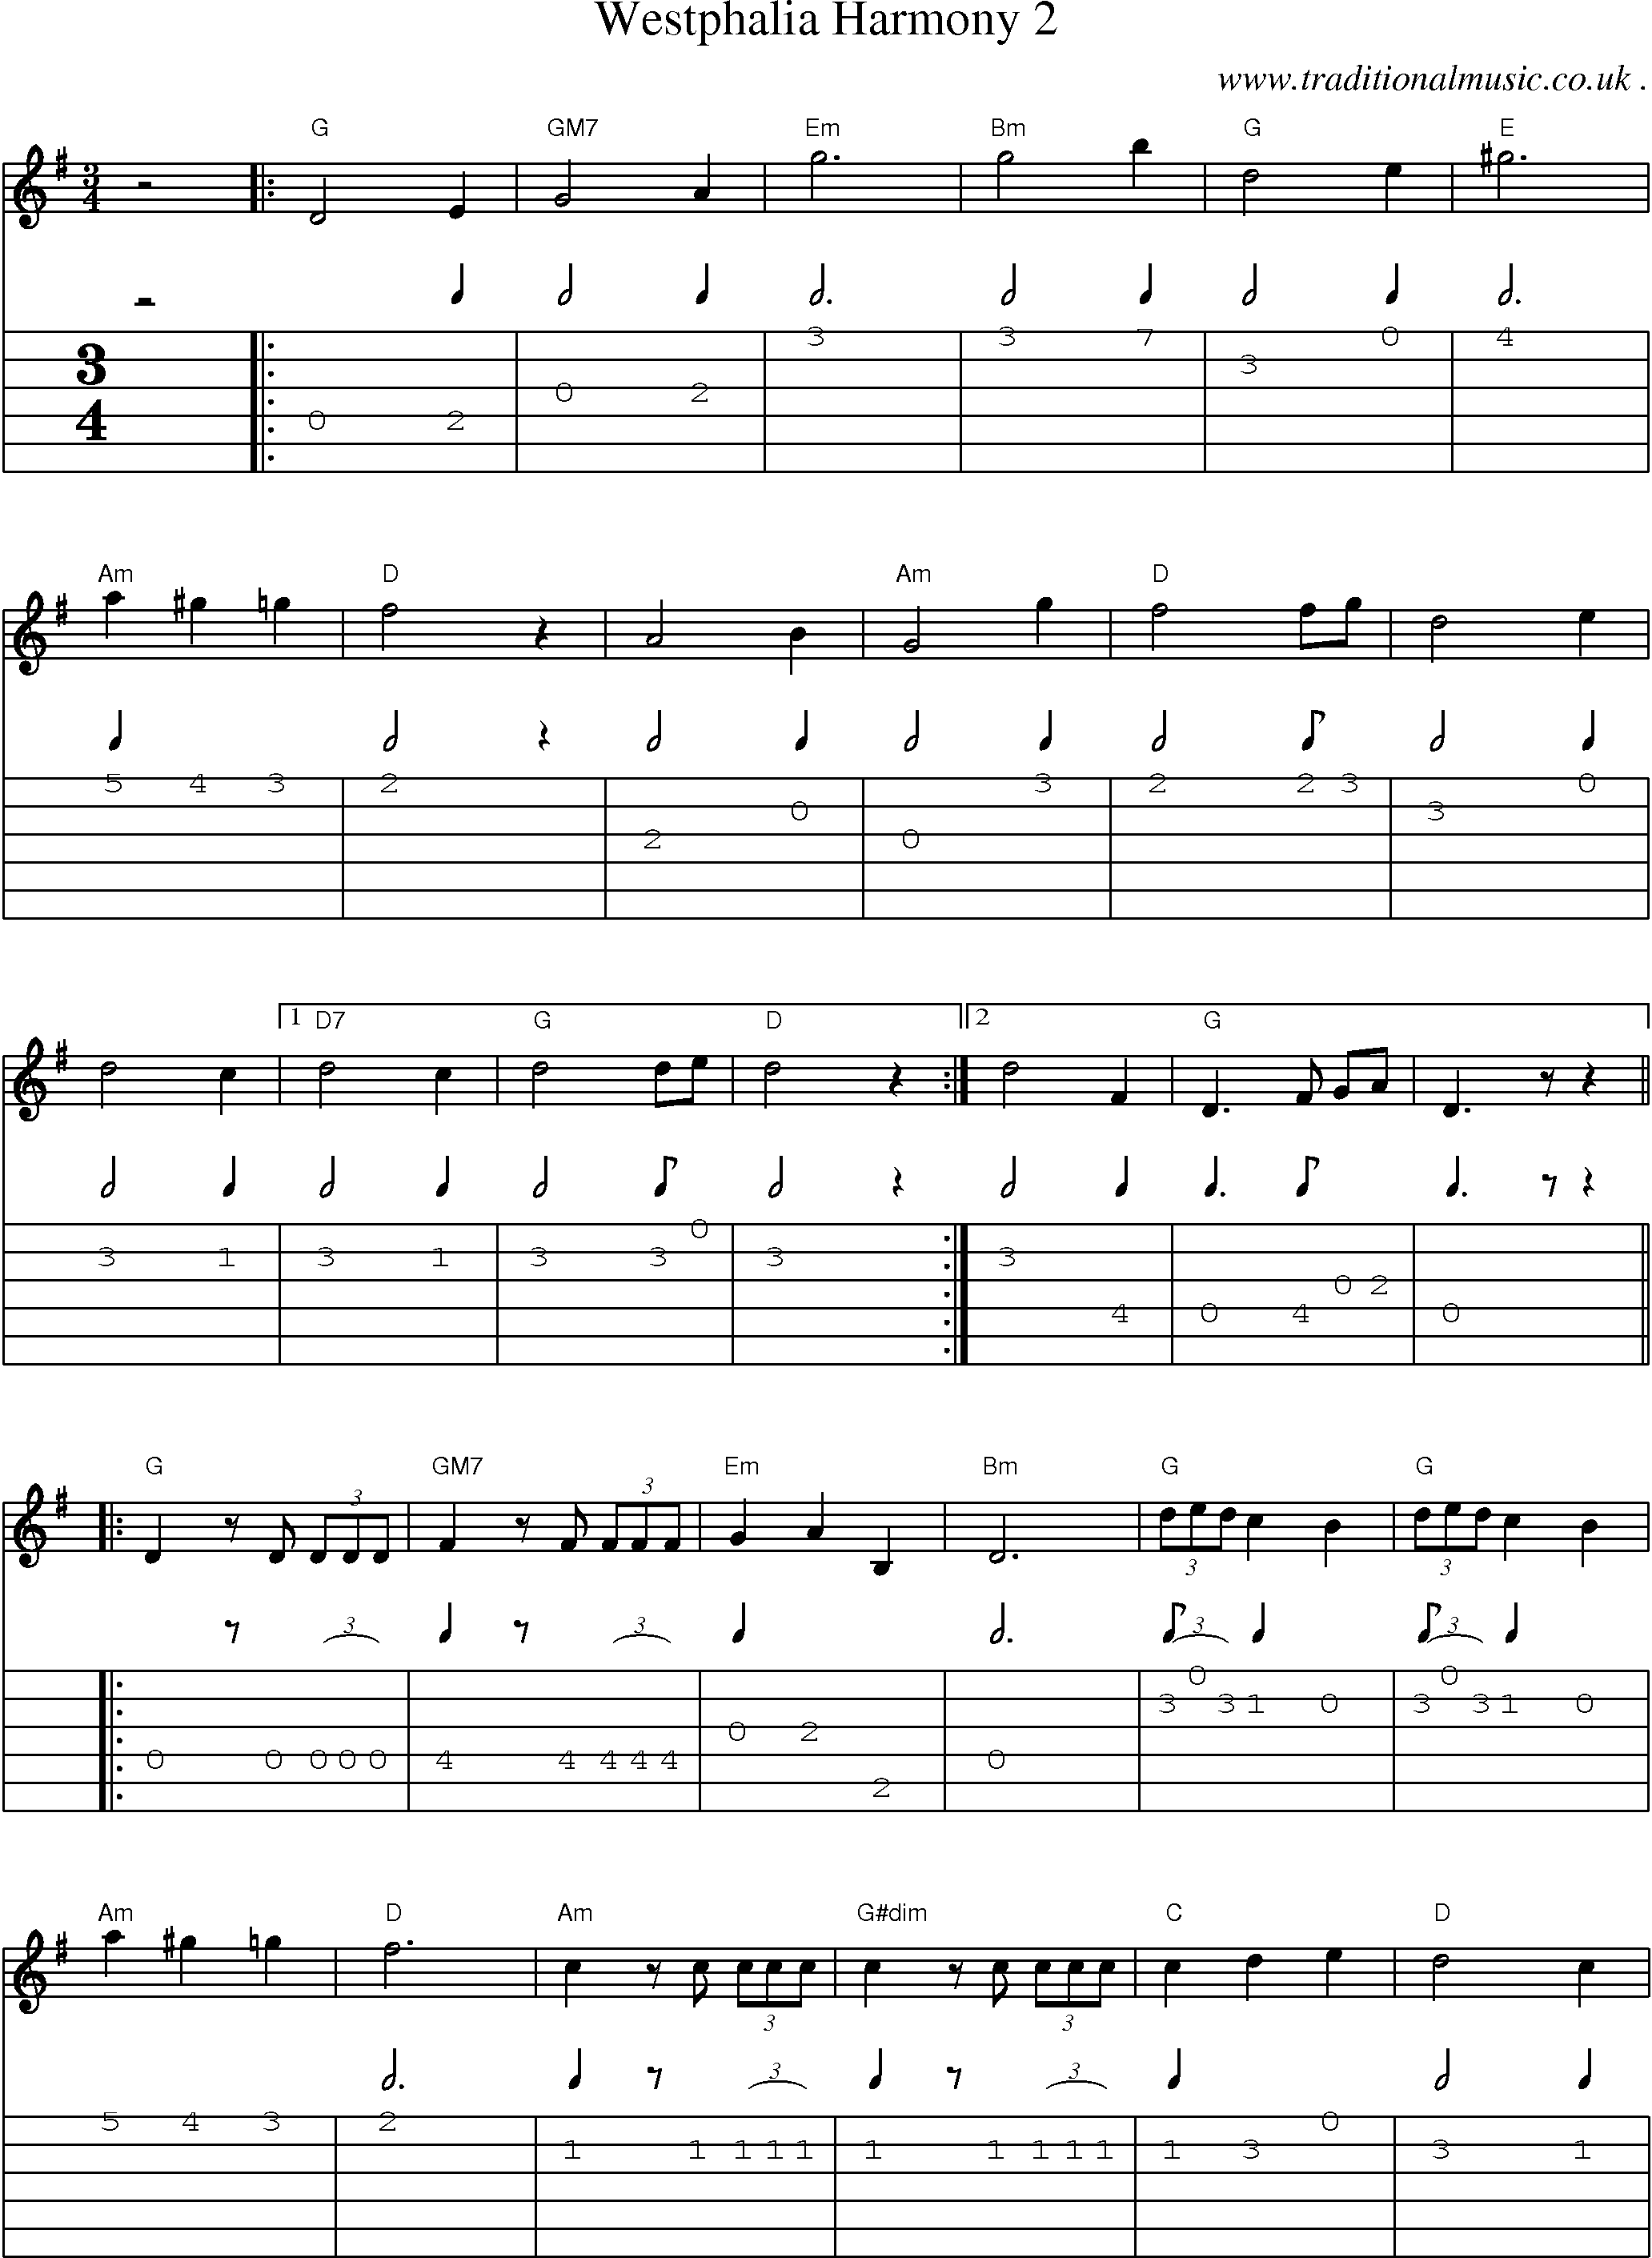 Music Score and Guitar Tabs for Westphalia Harmony 2